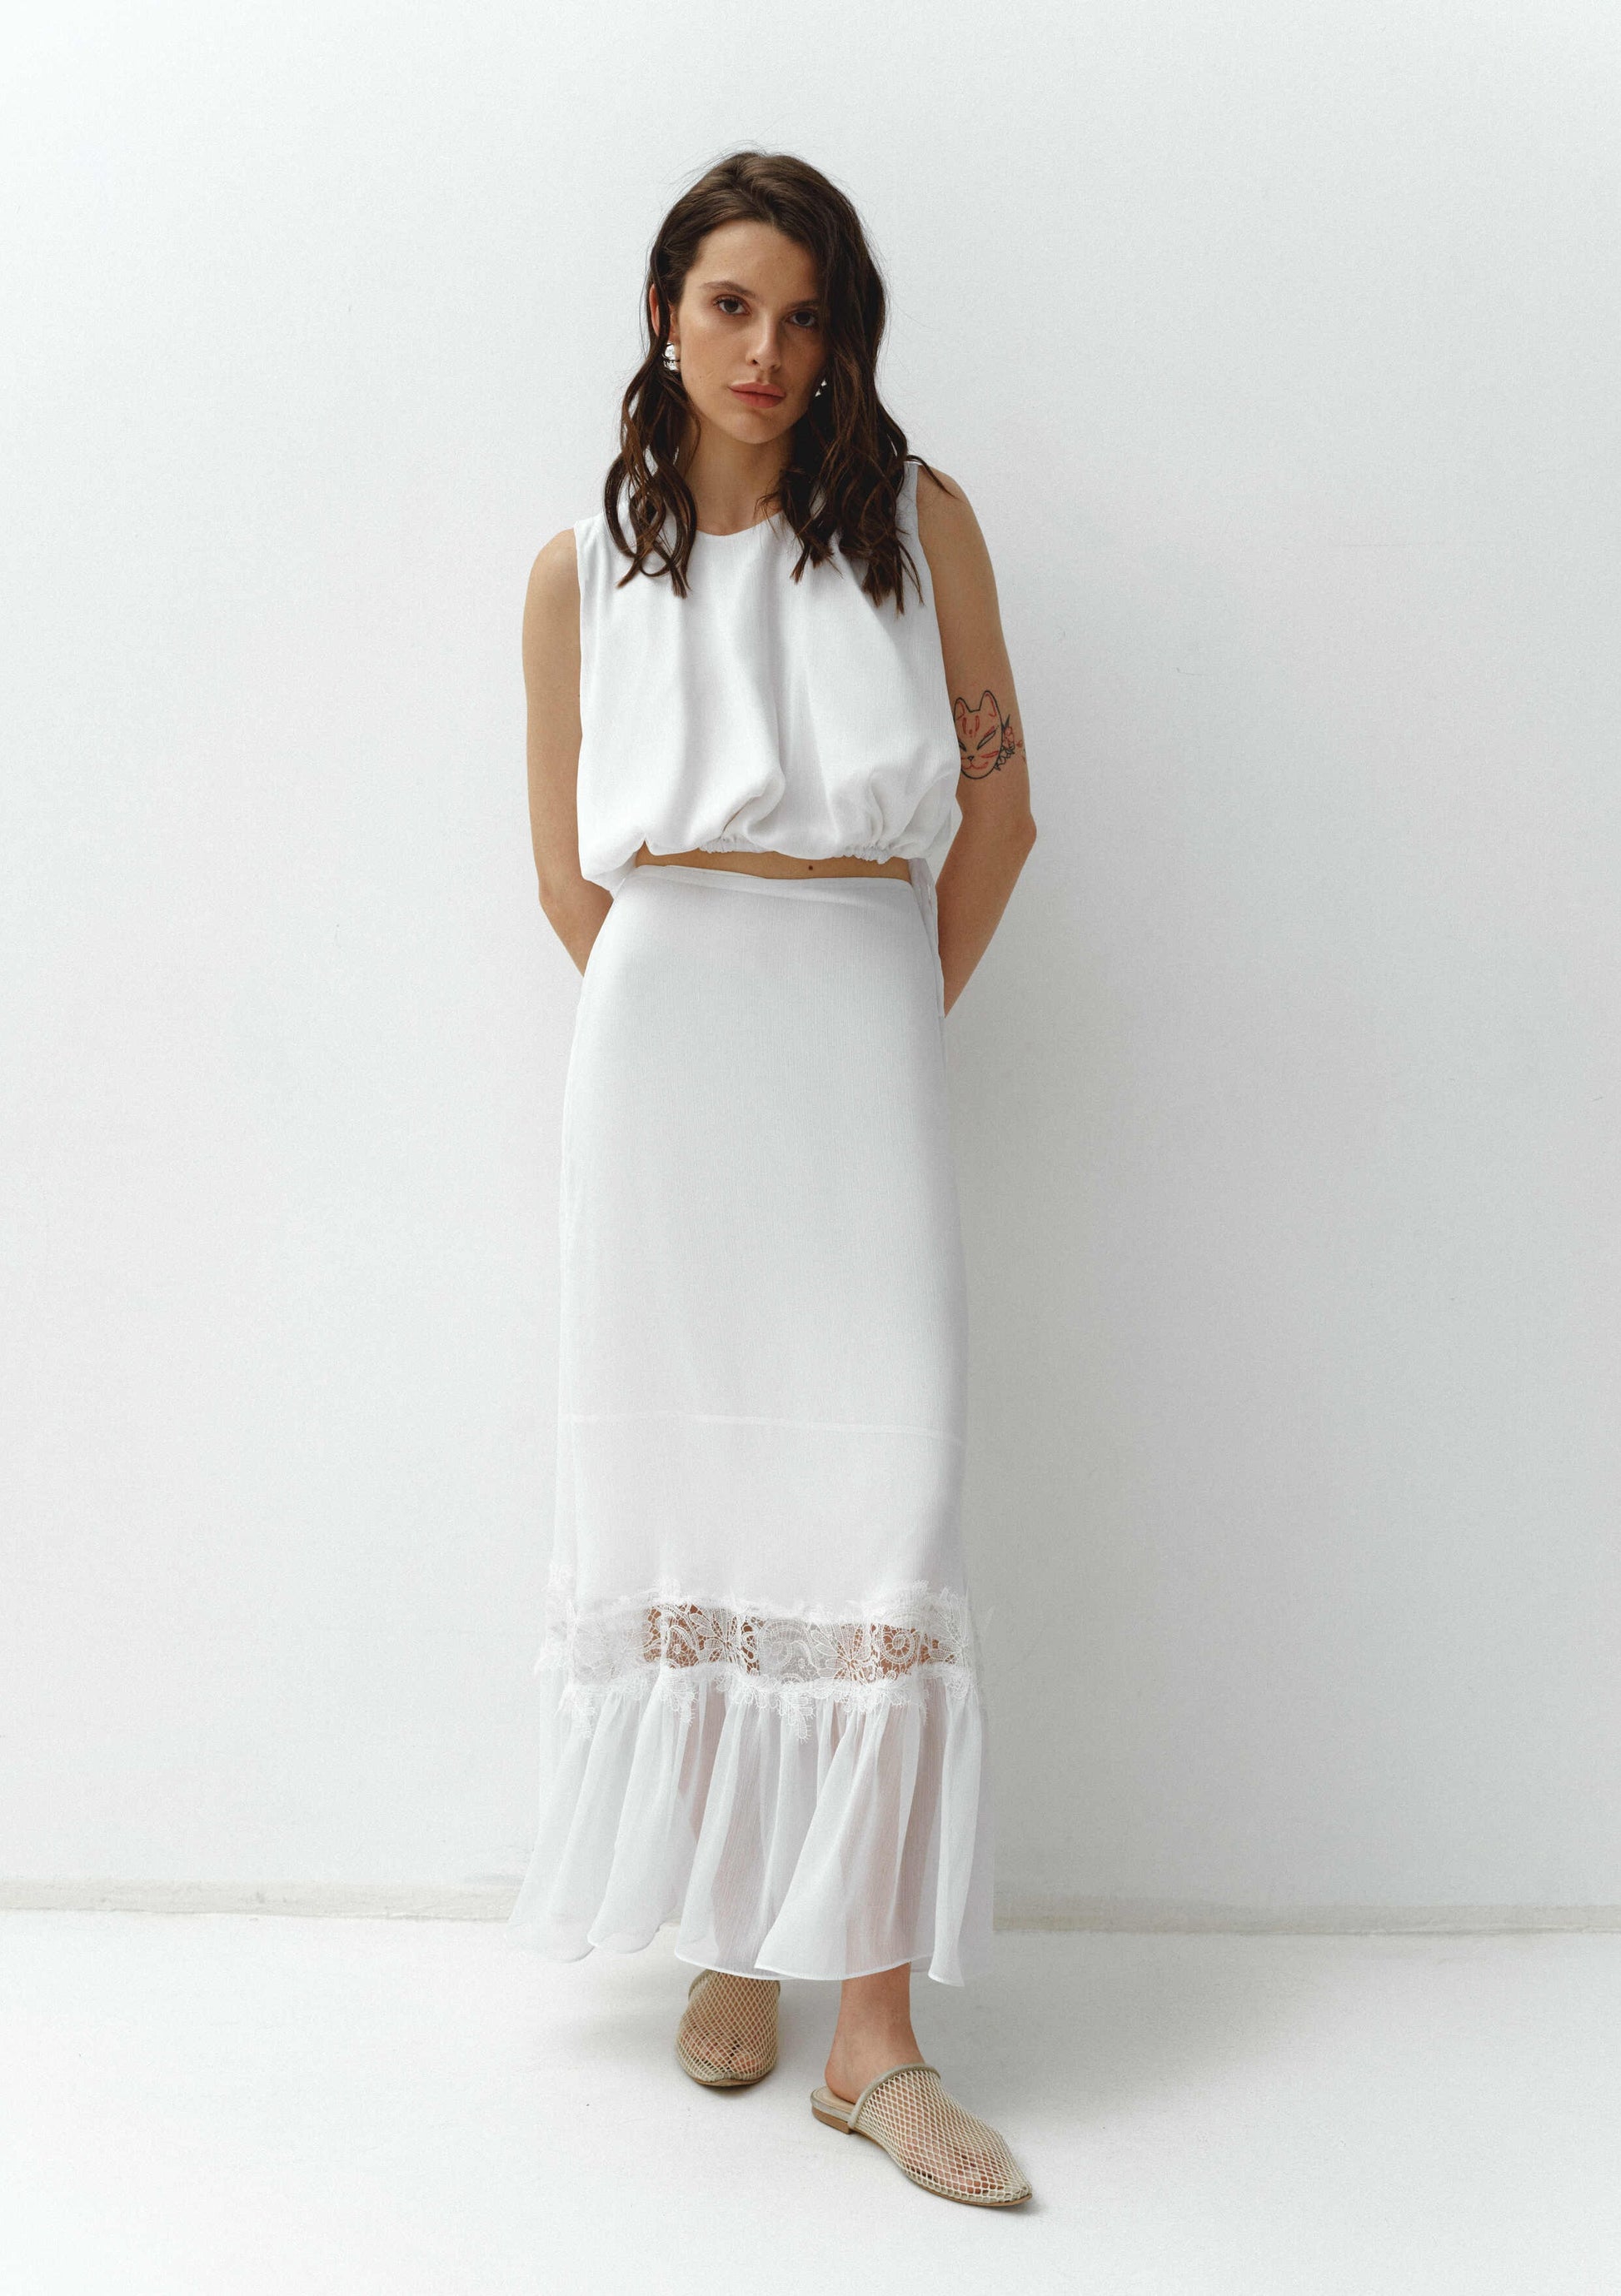 Girl in white chiffon suit with long skirt